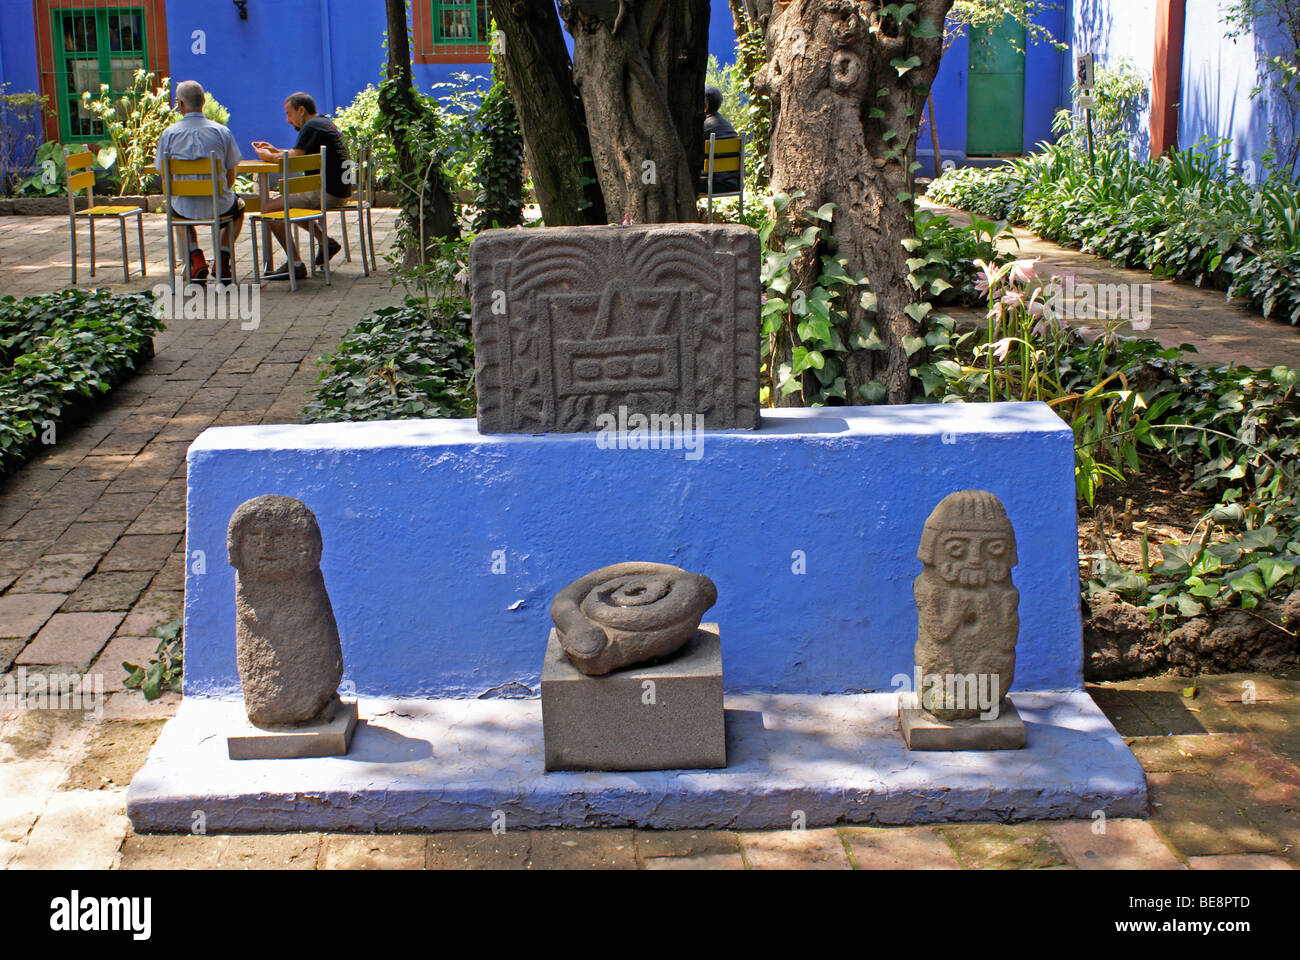 Pre-Columbian artifacts and outdoor cafe , Museo Frida Kahlo, also known as the Casa Azul, or Blue house, Coyoacan, Mexico City Stock Photo